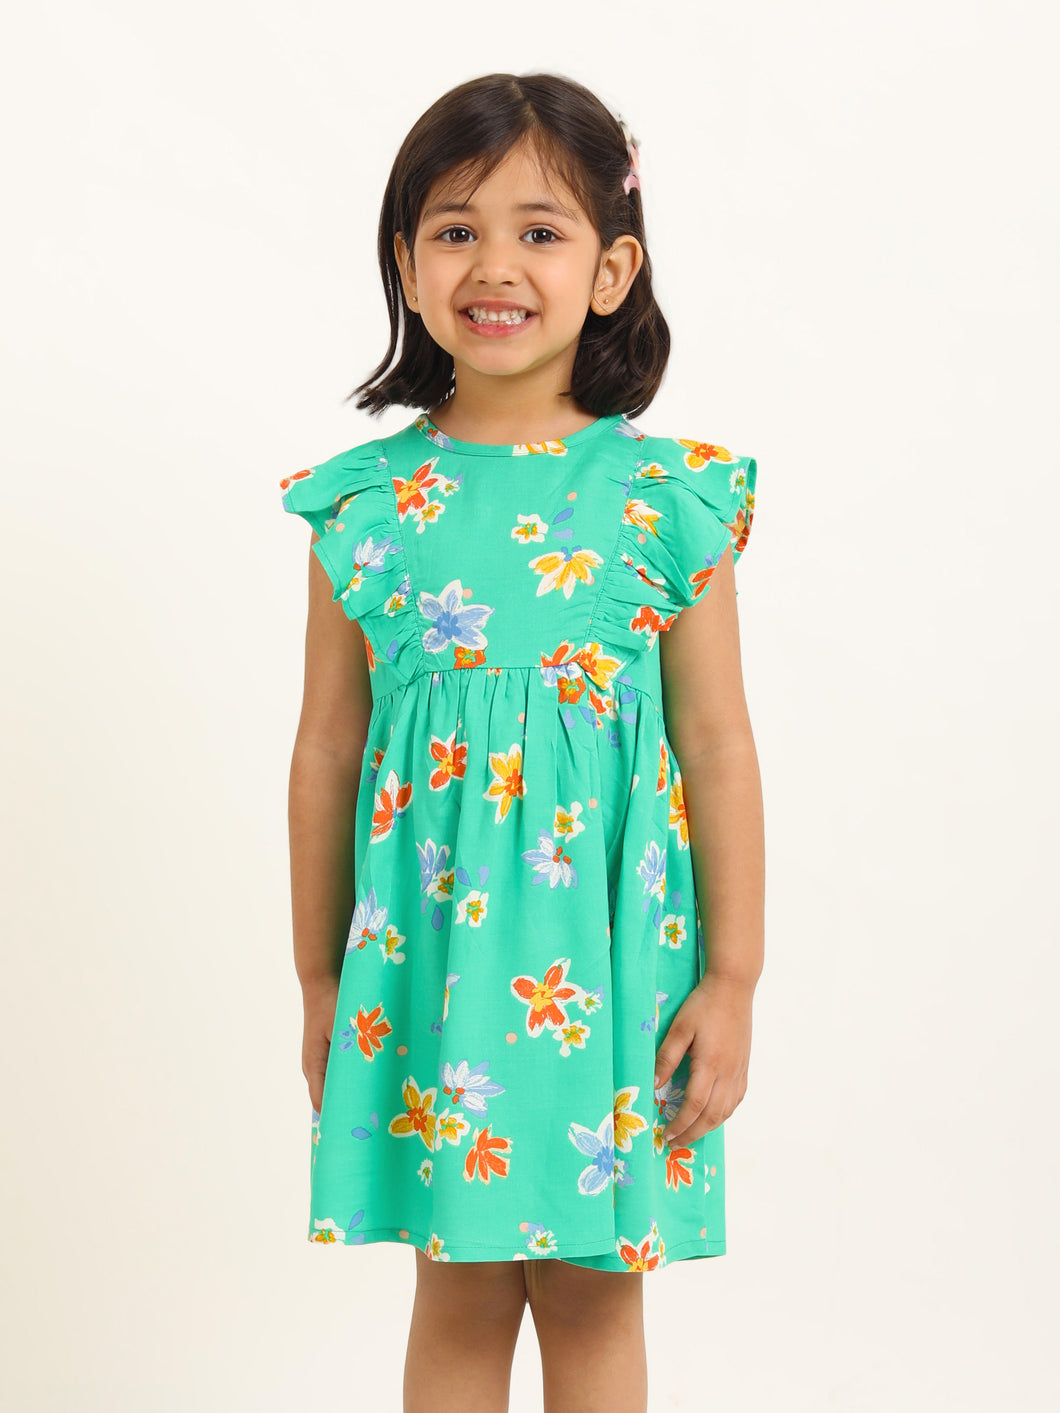 Campana Girls Janet Frilly Dress - Floral Bloom Print - Green & Multicolour